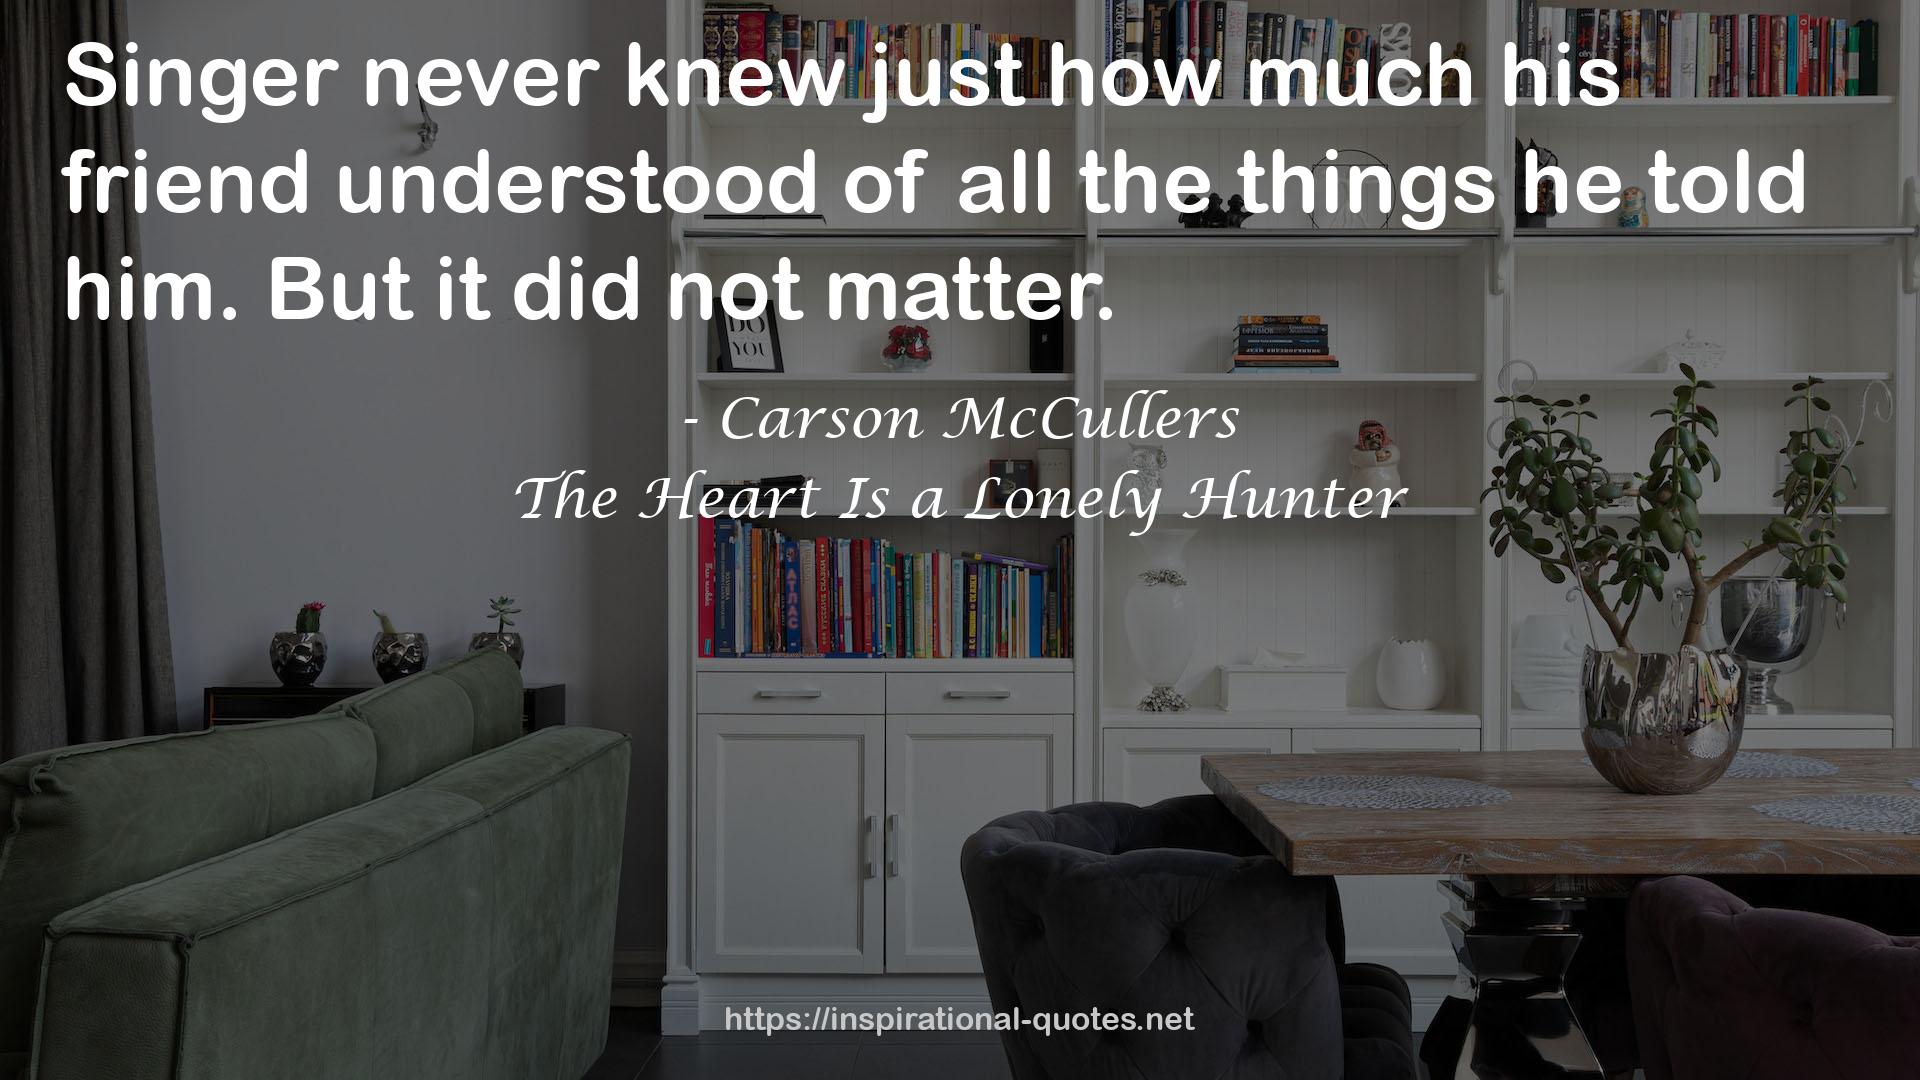 The Heart Is a Lonely Hunter QUOTES